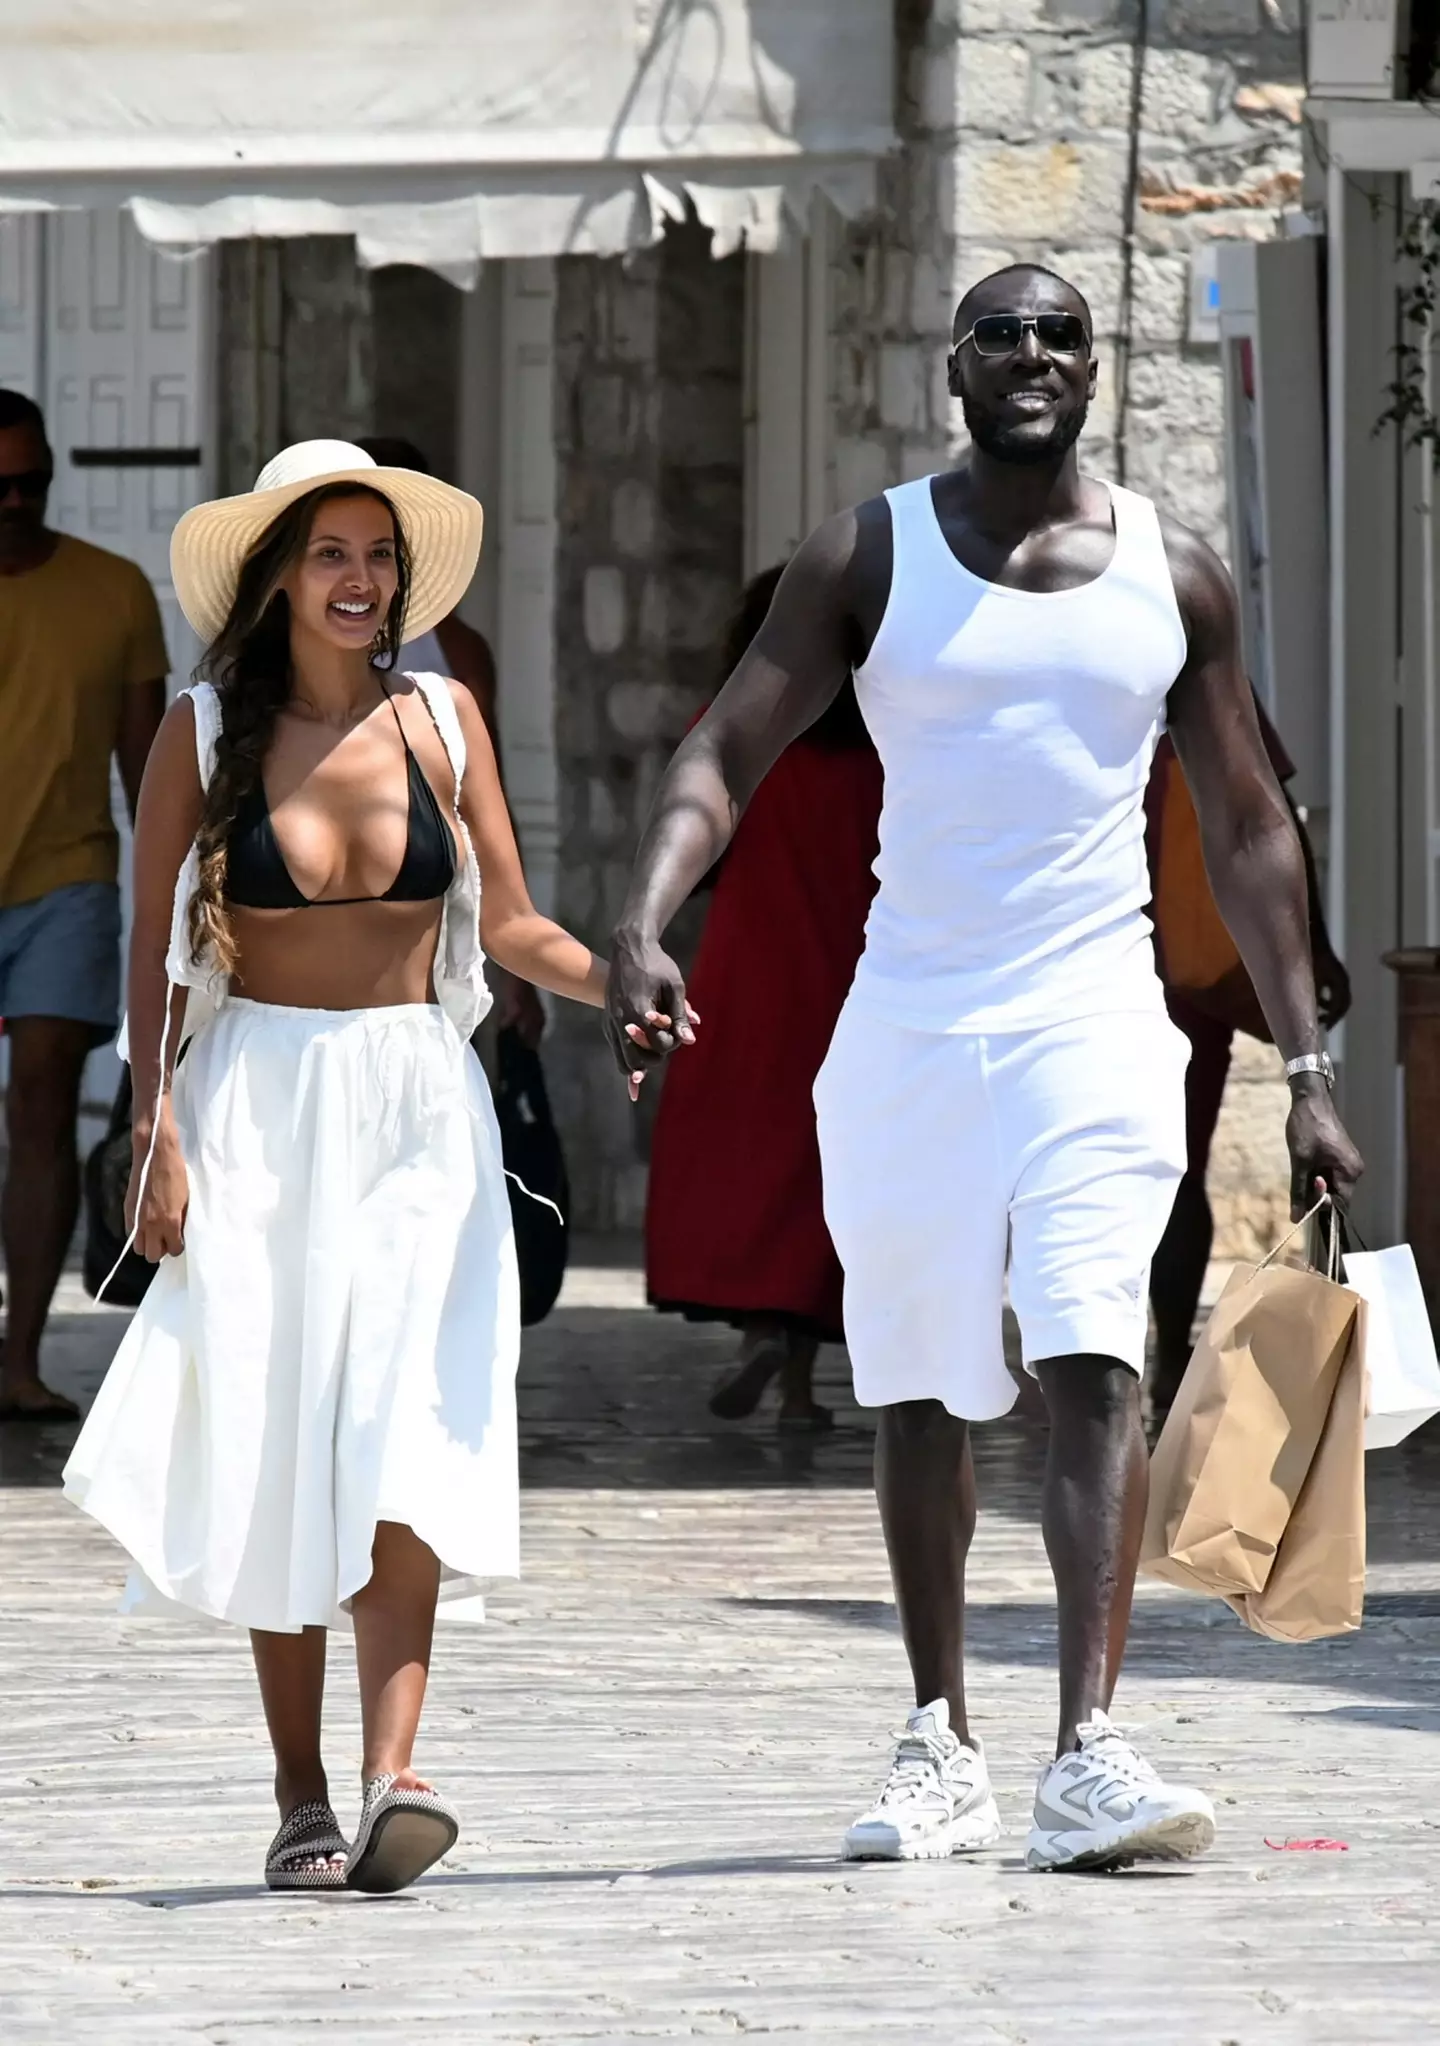 The couple have been spotted hand-in-hand in Greece together.